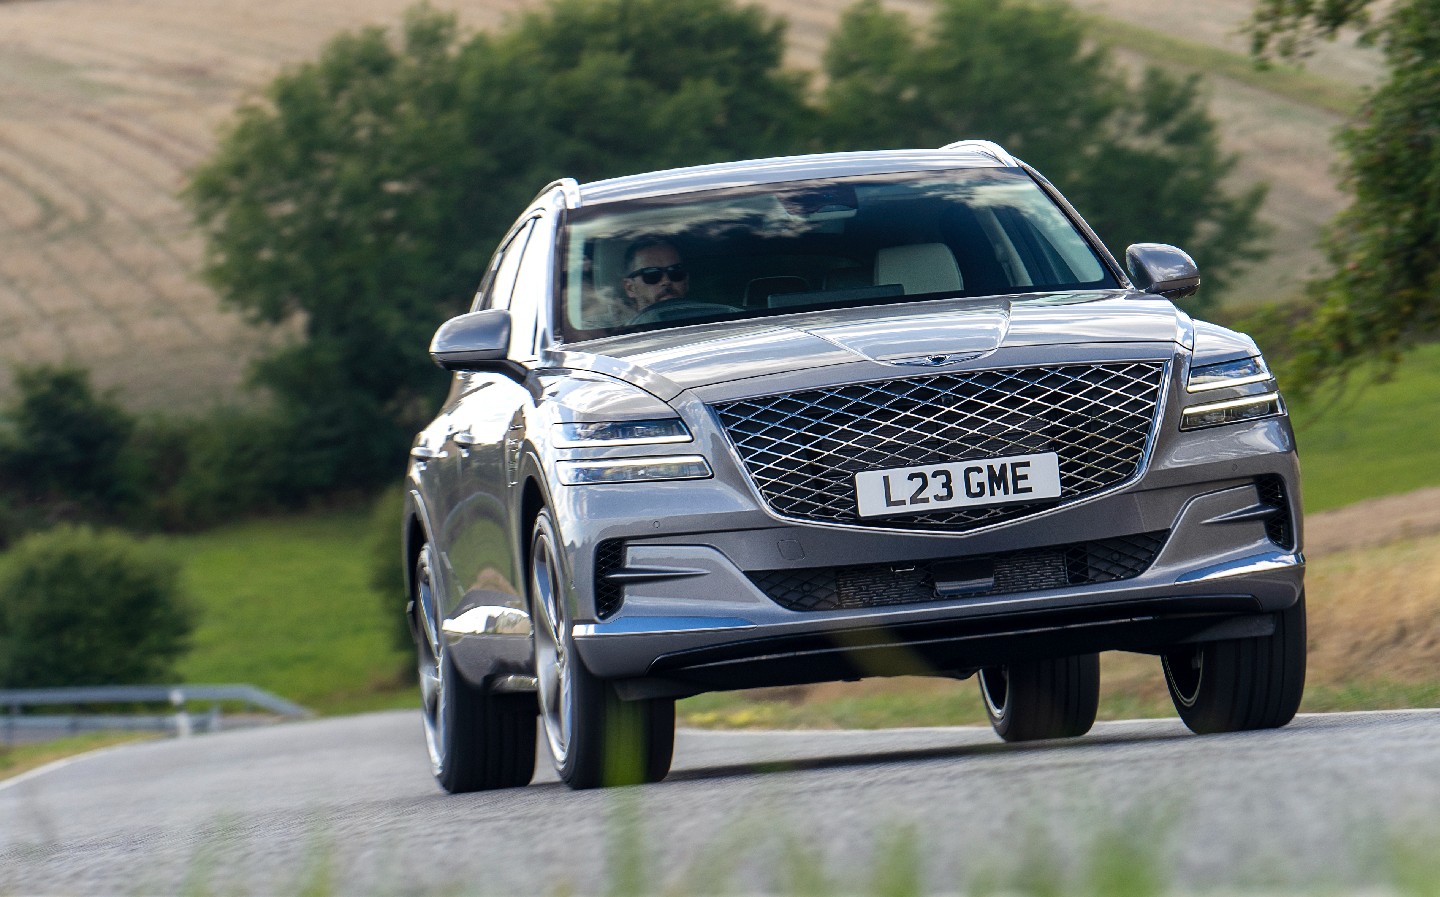 Genesis GV80 2021 review by Will Dron for Sunday Times Driving.co.uk